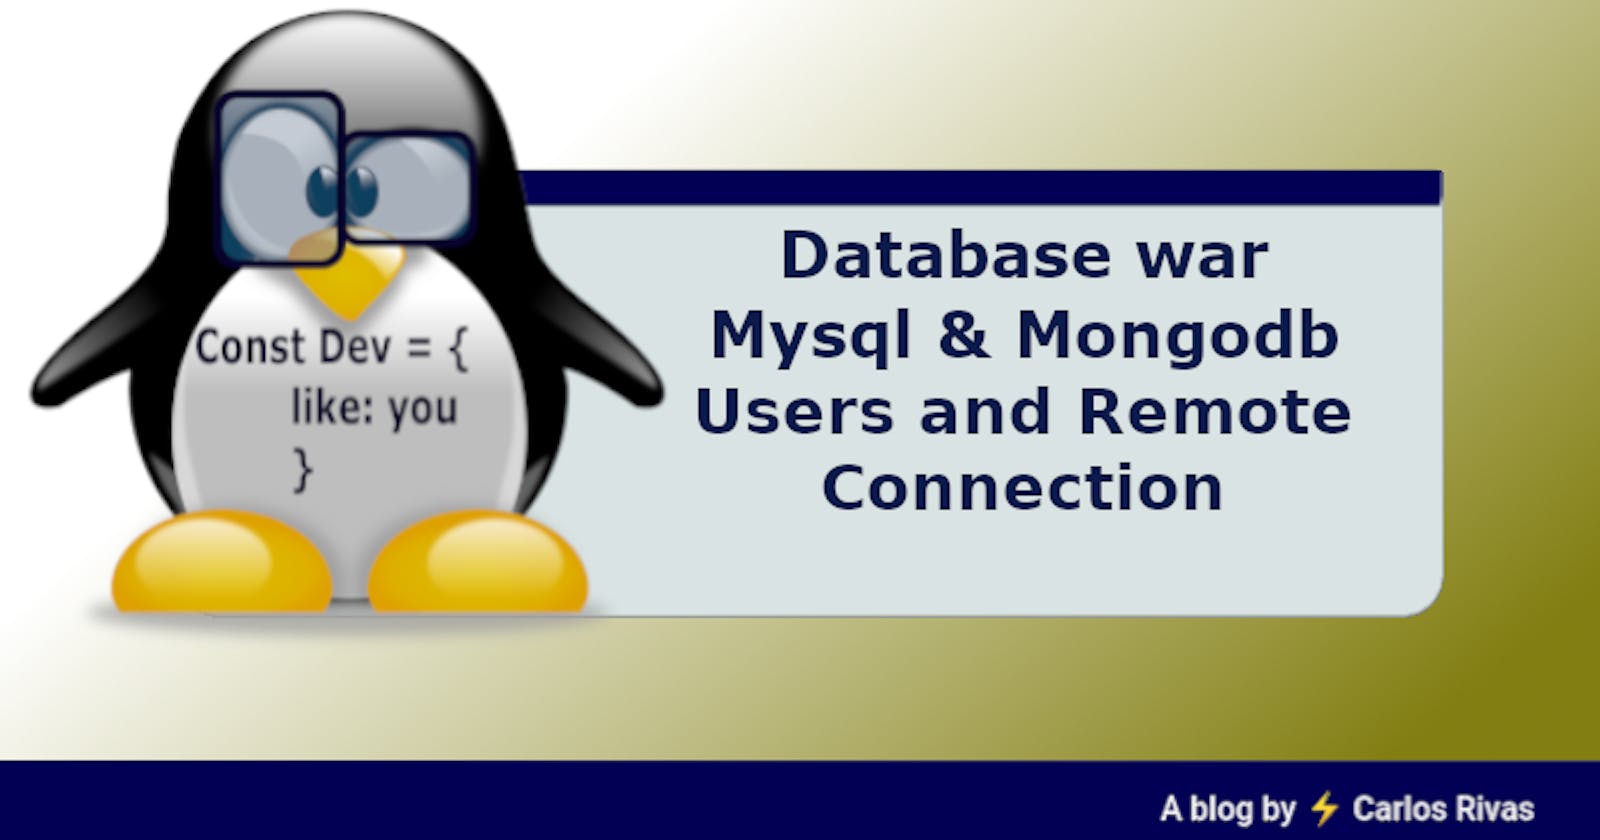 Database war
Mysql & Mongodb
Users and Remote Connection